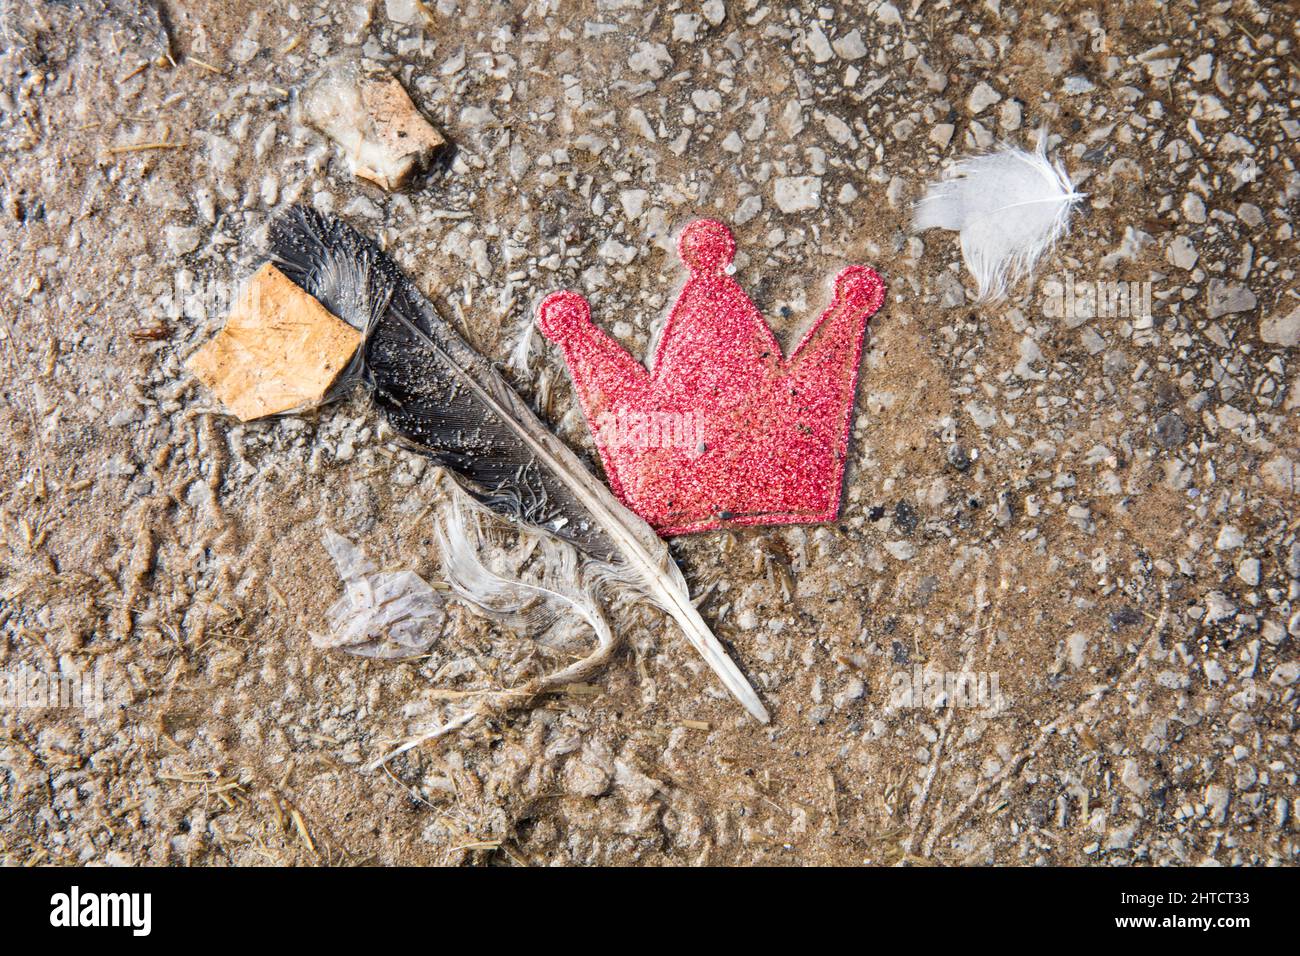 Promenade, Blackpool, Lancashire, 2017. Detail of rubbish in a puddle on the Promenade, including birds' feathers, cigarette ends and a small cloth crown. Stock Photo